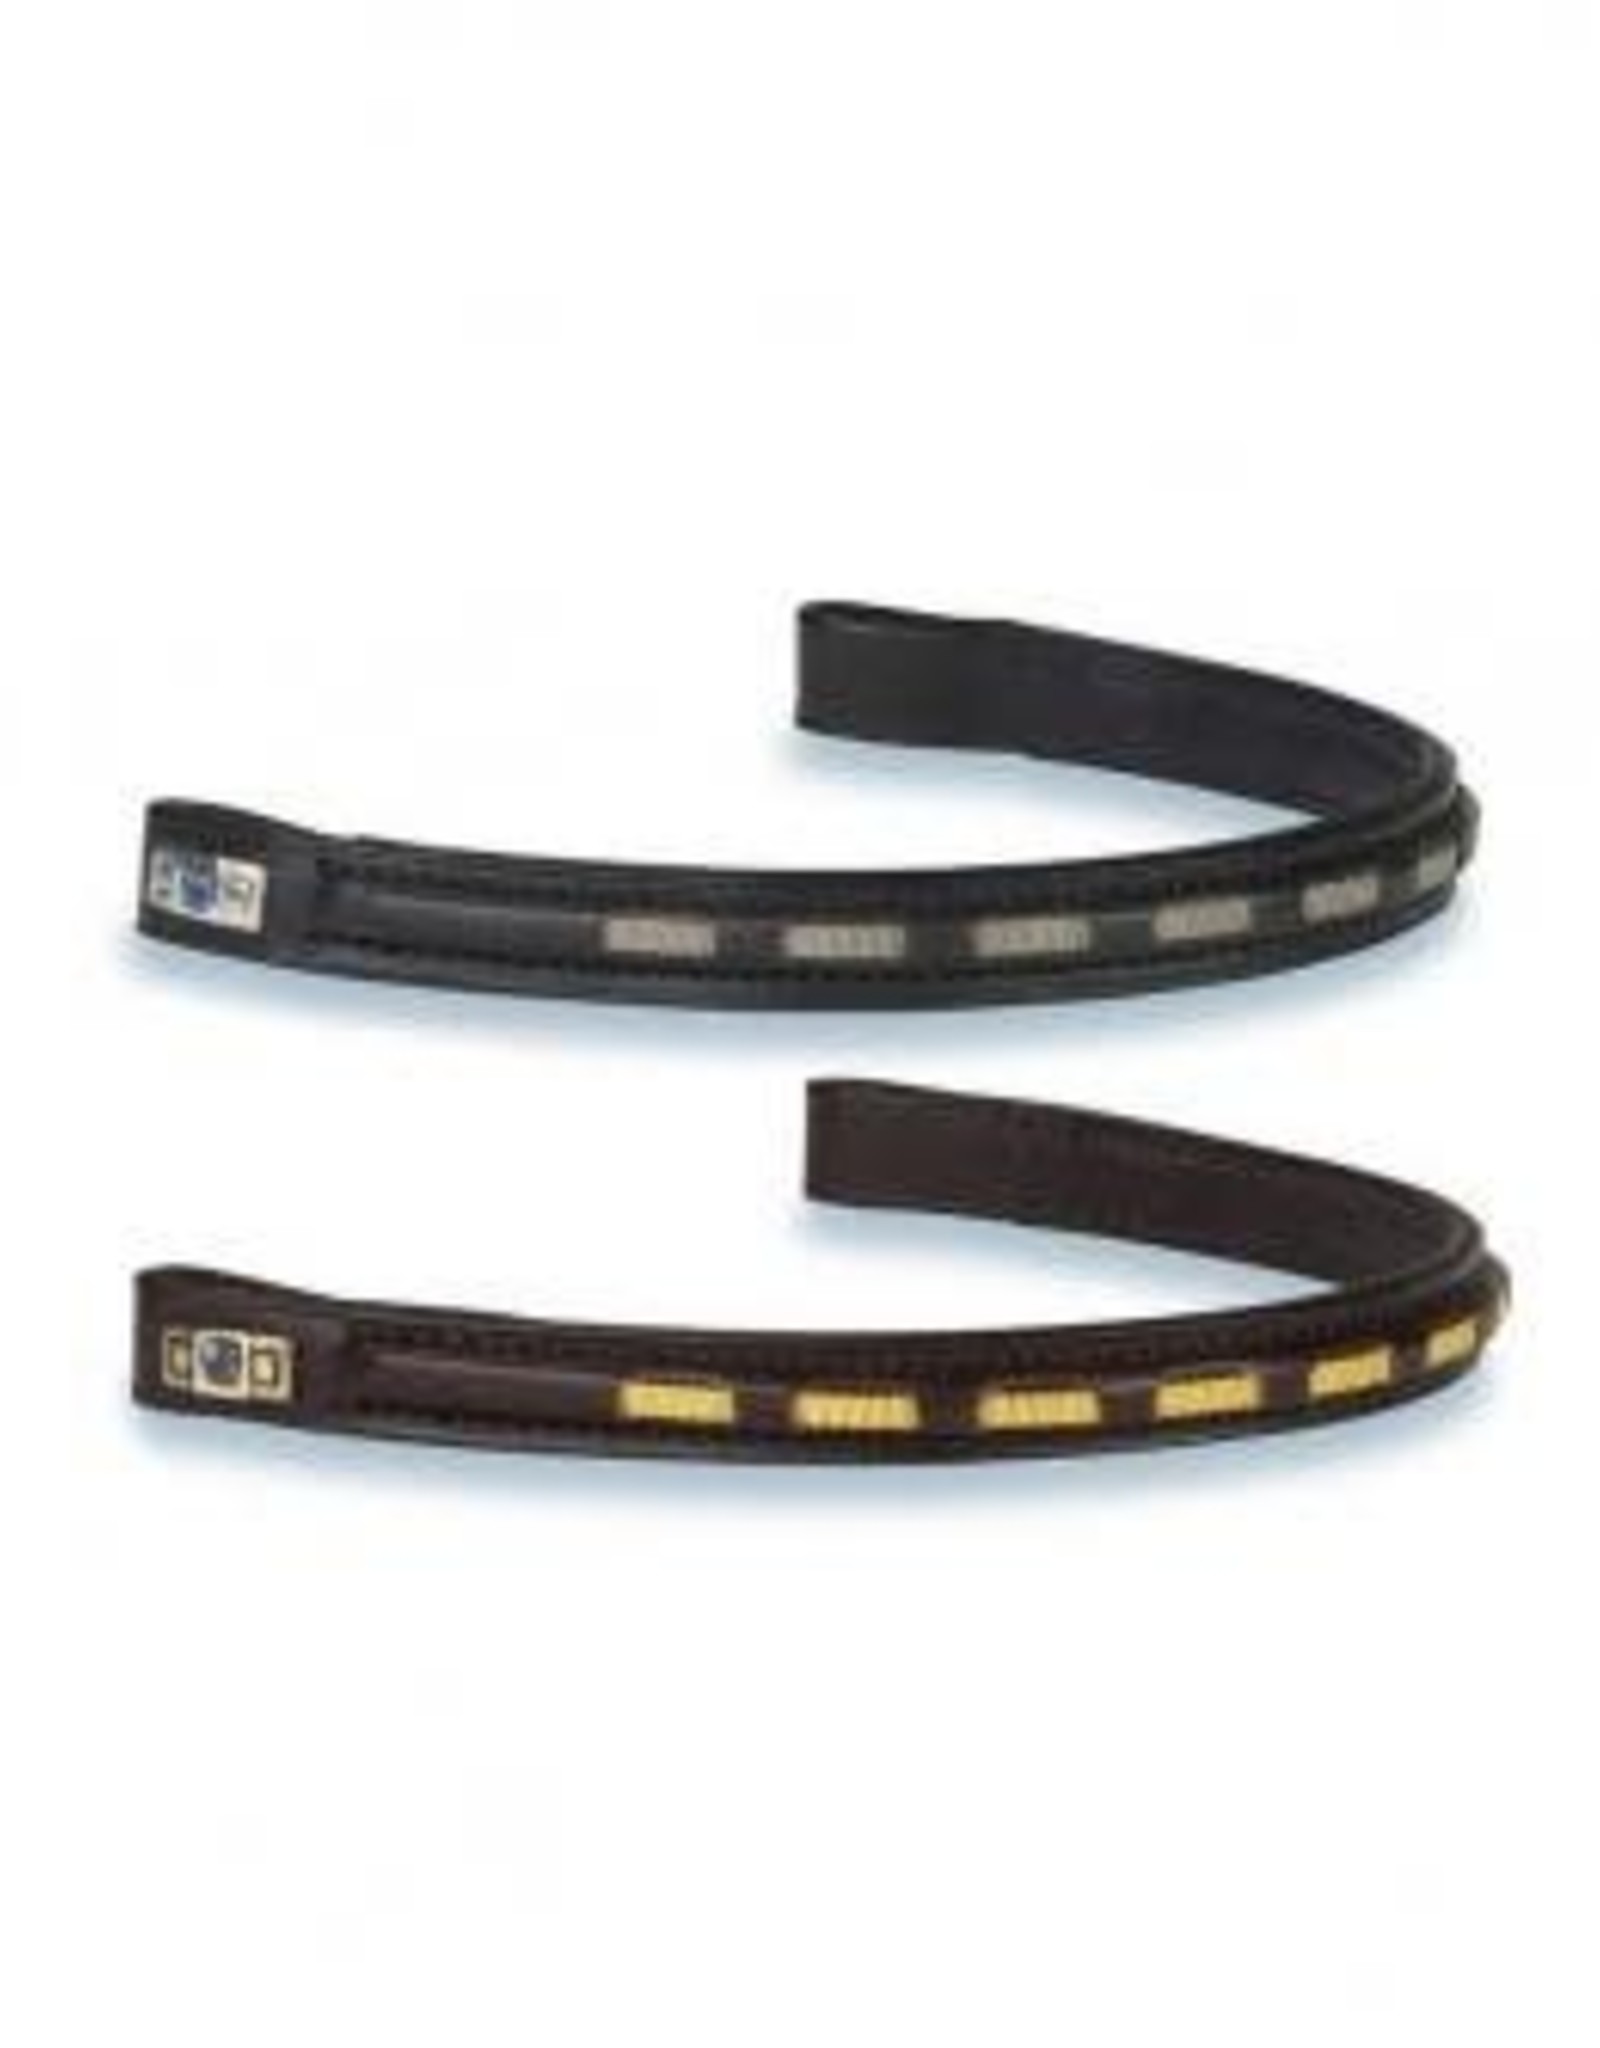 Copy of Stubben Browband 3300 Galway Gold/Brown 6320020GG